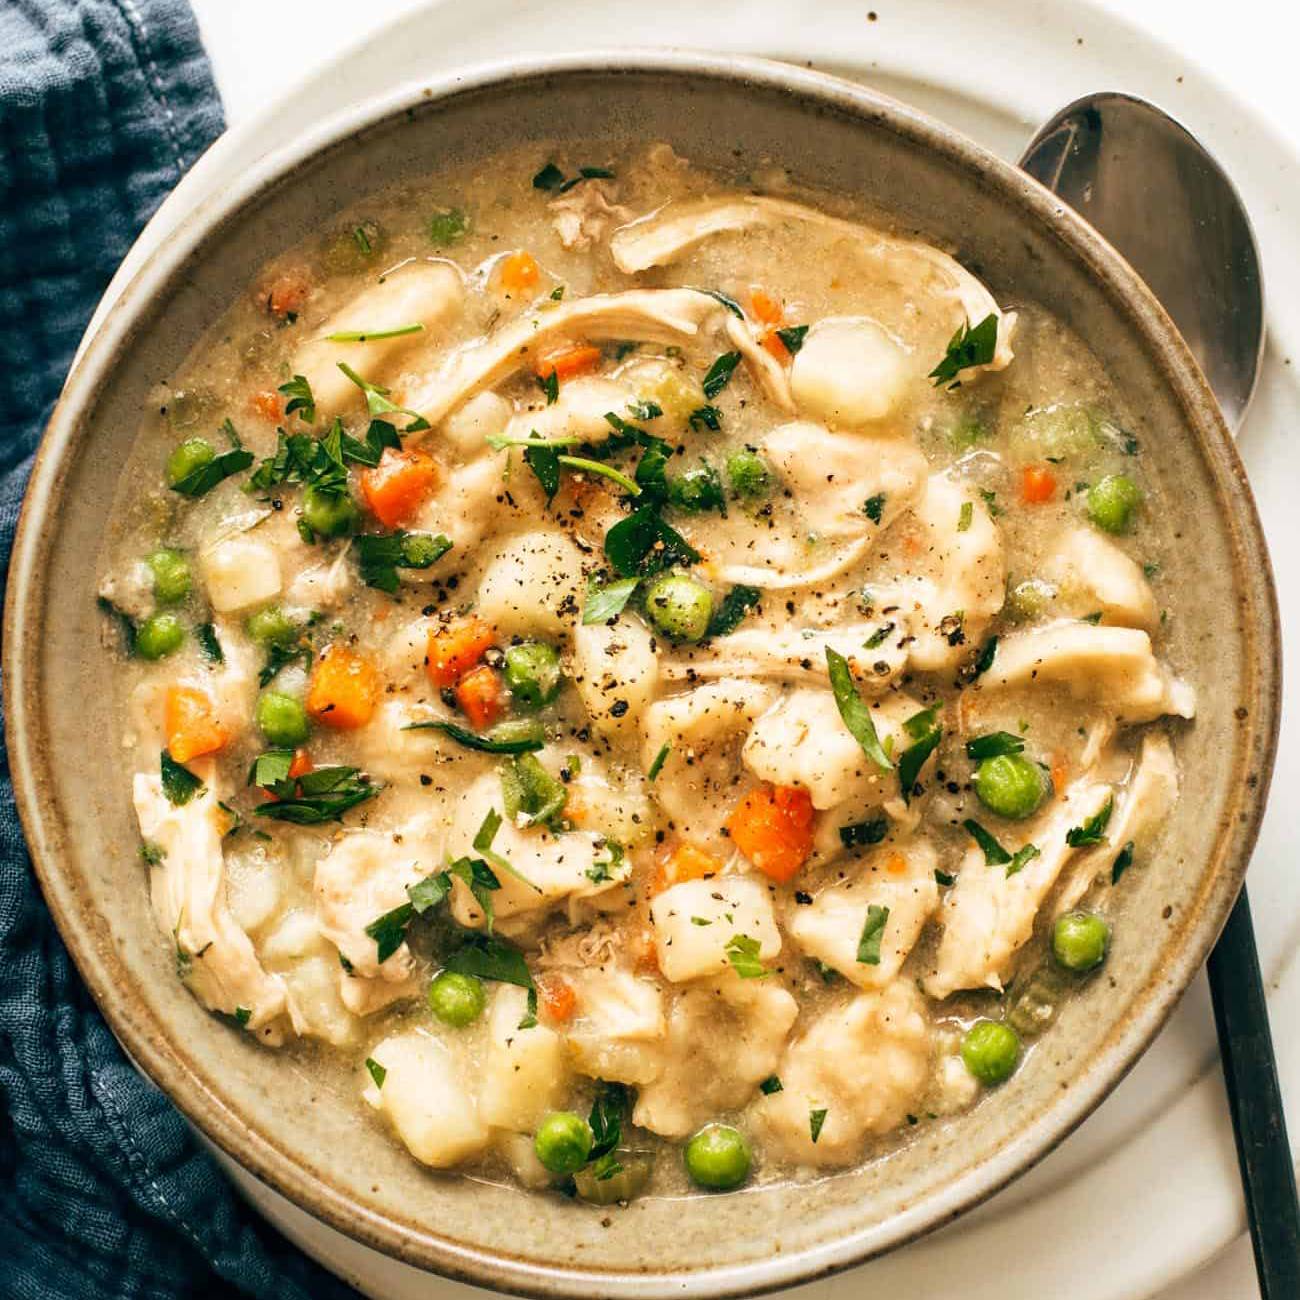 Chicken and dumplings in a bowl